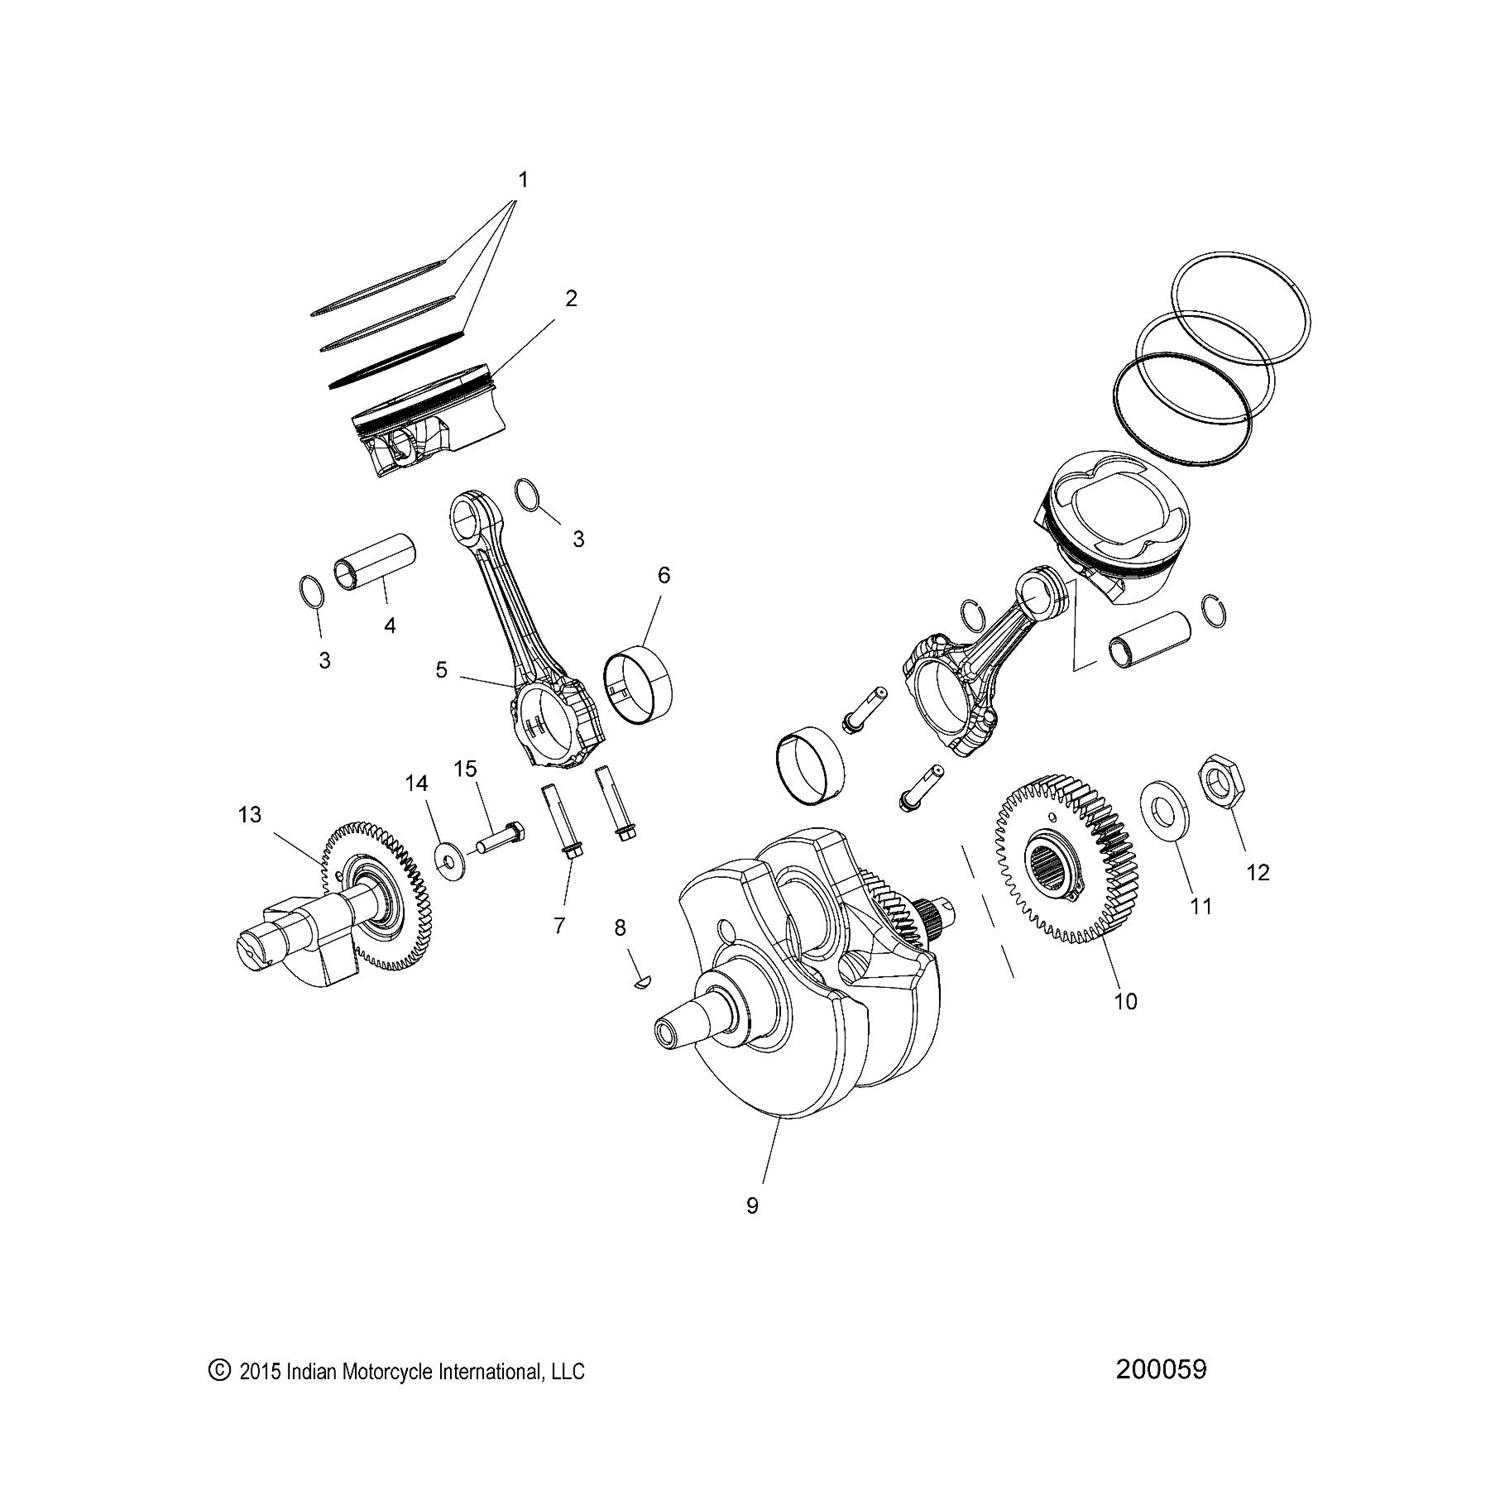 ASM., CONNECTING ROD [INCL. 7]